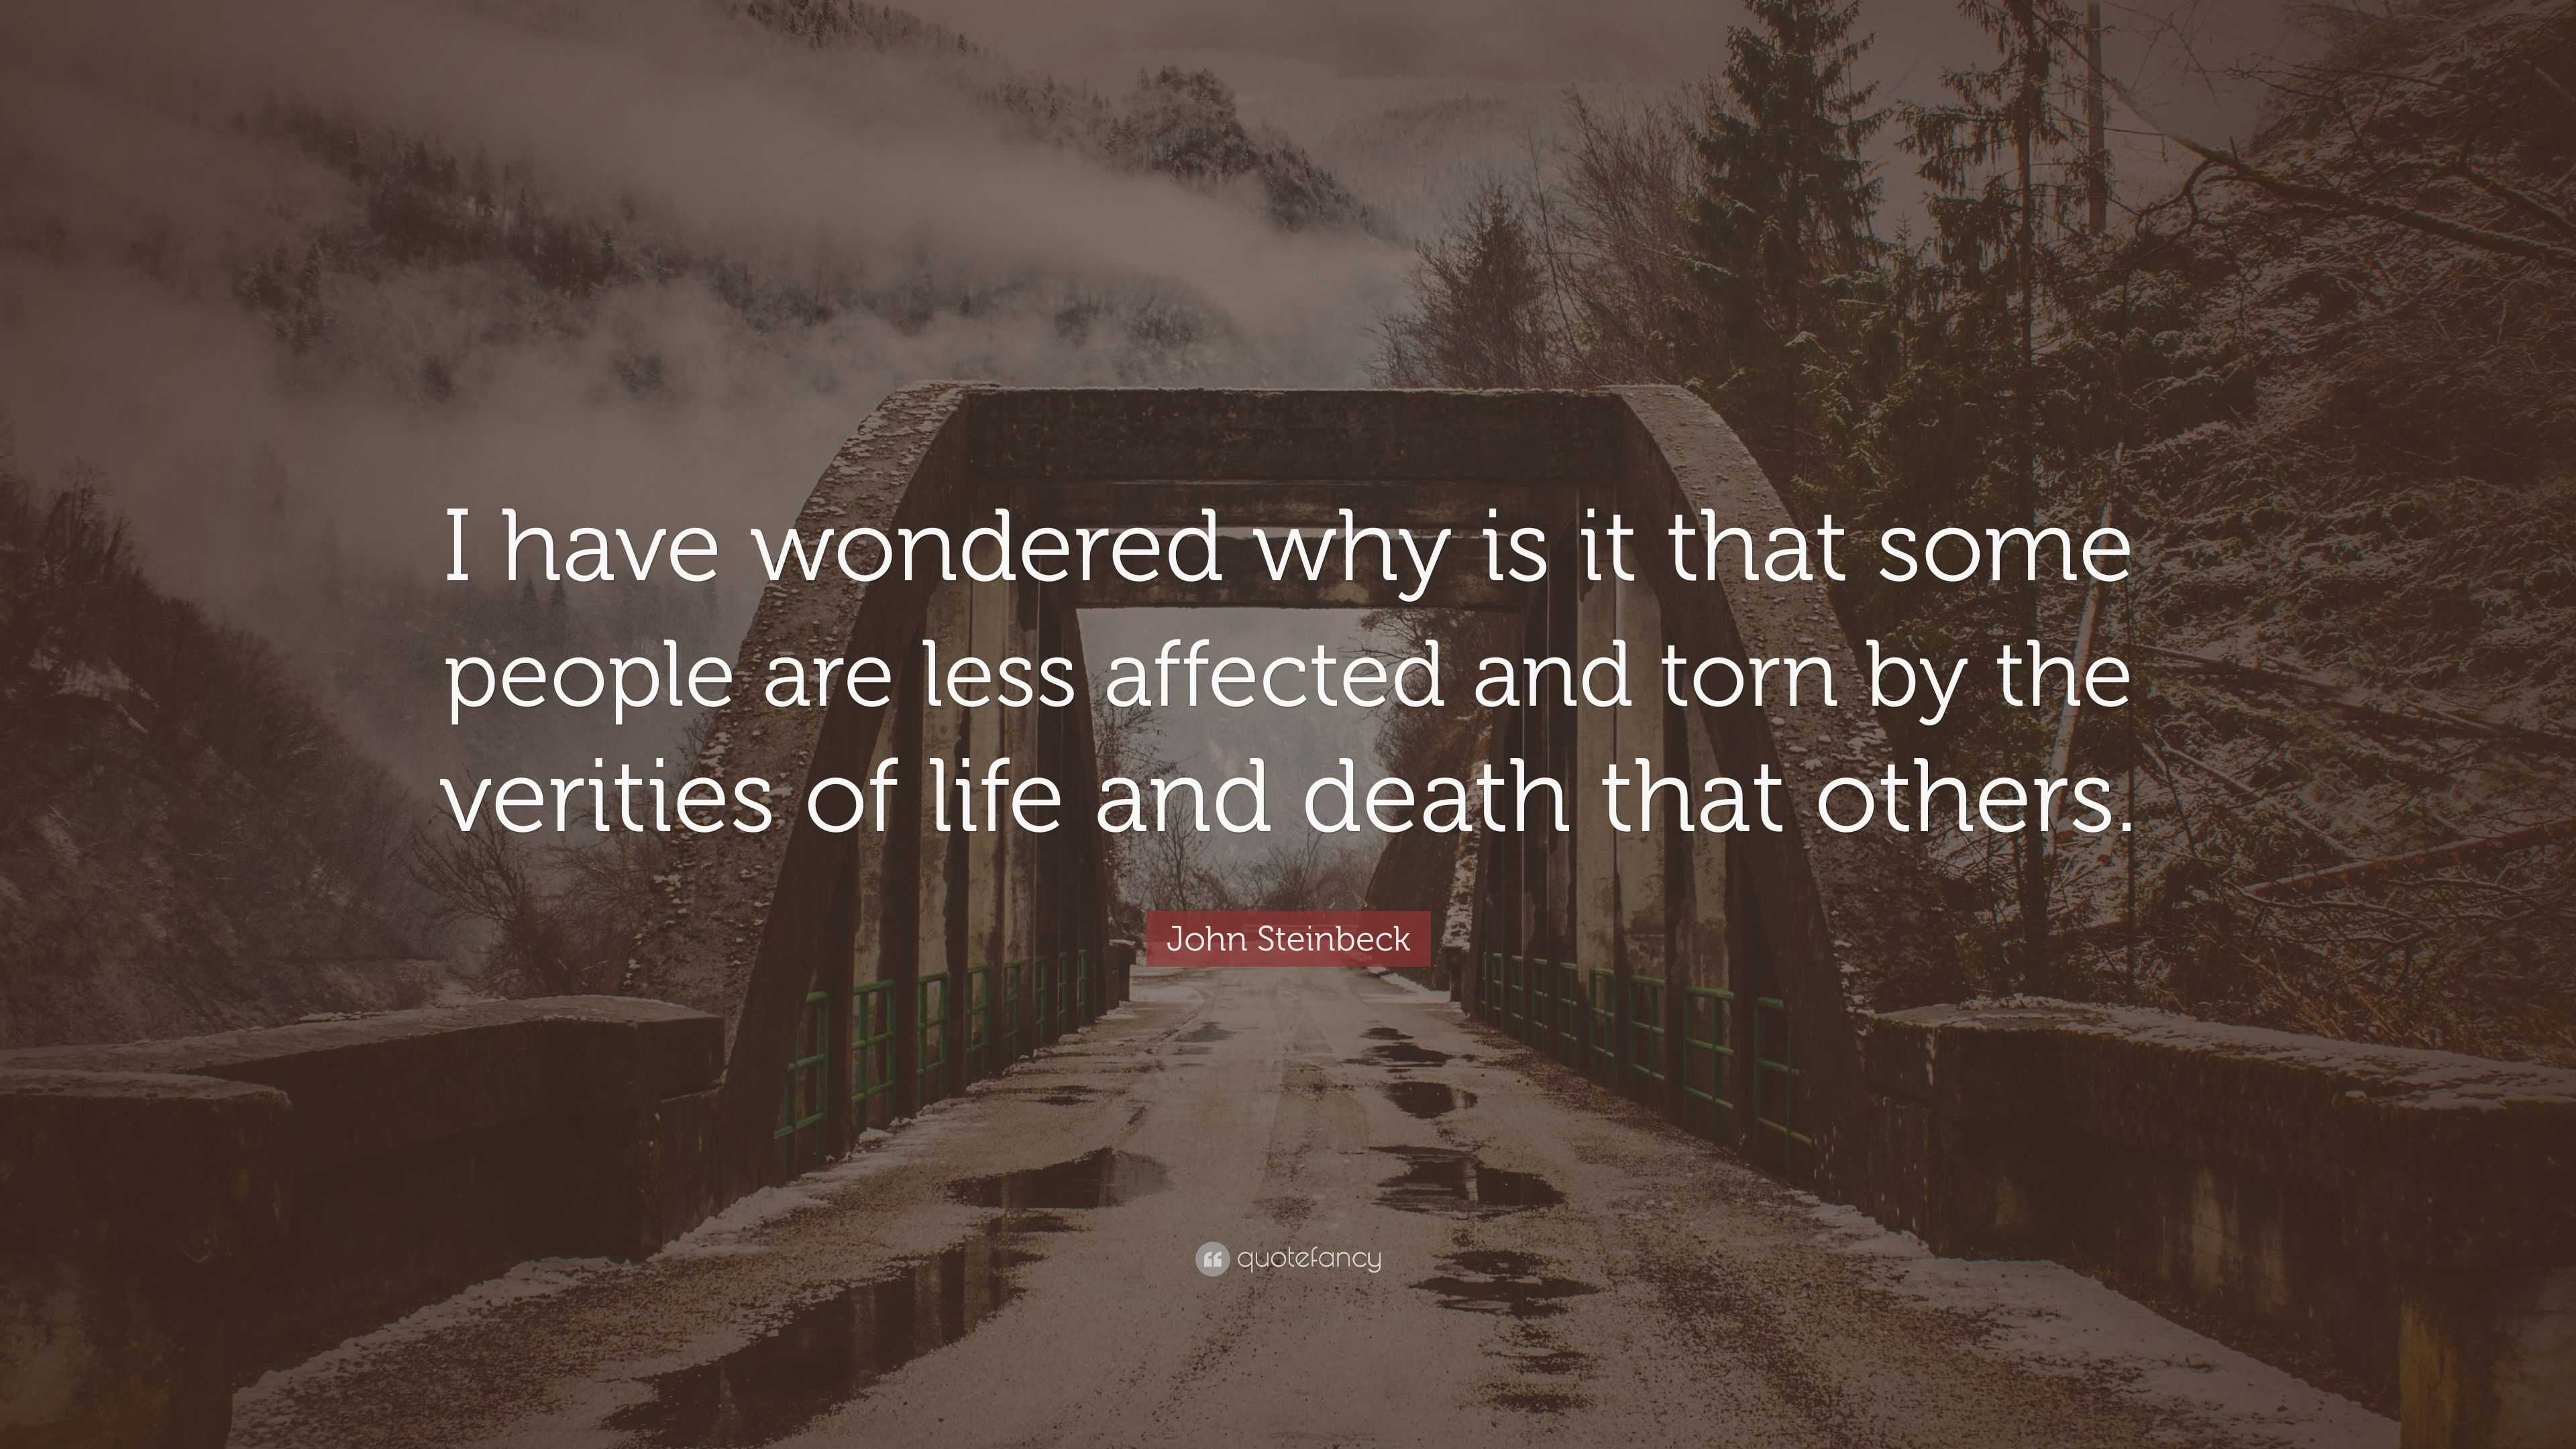 John Steinbeck Quote: “I have wondered why is it that some people are ...